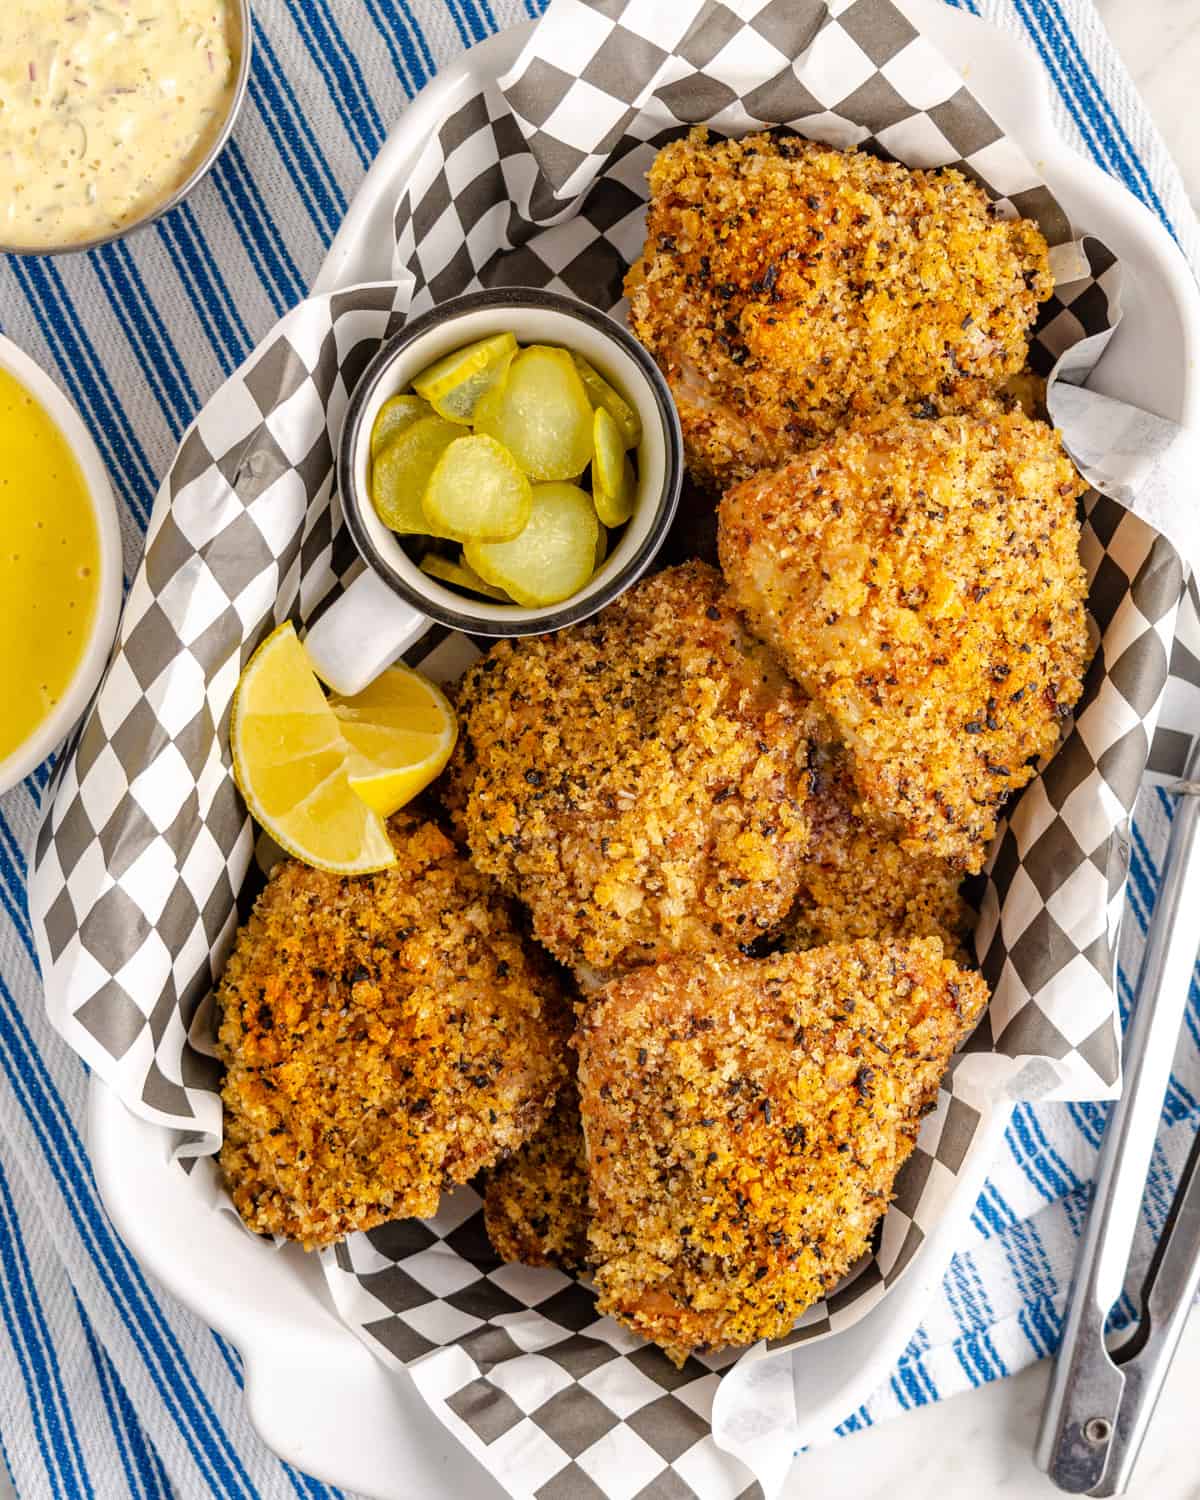 Pork Rind Coated fried chicken ina dish with pickles and remoulade